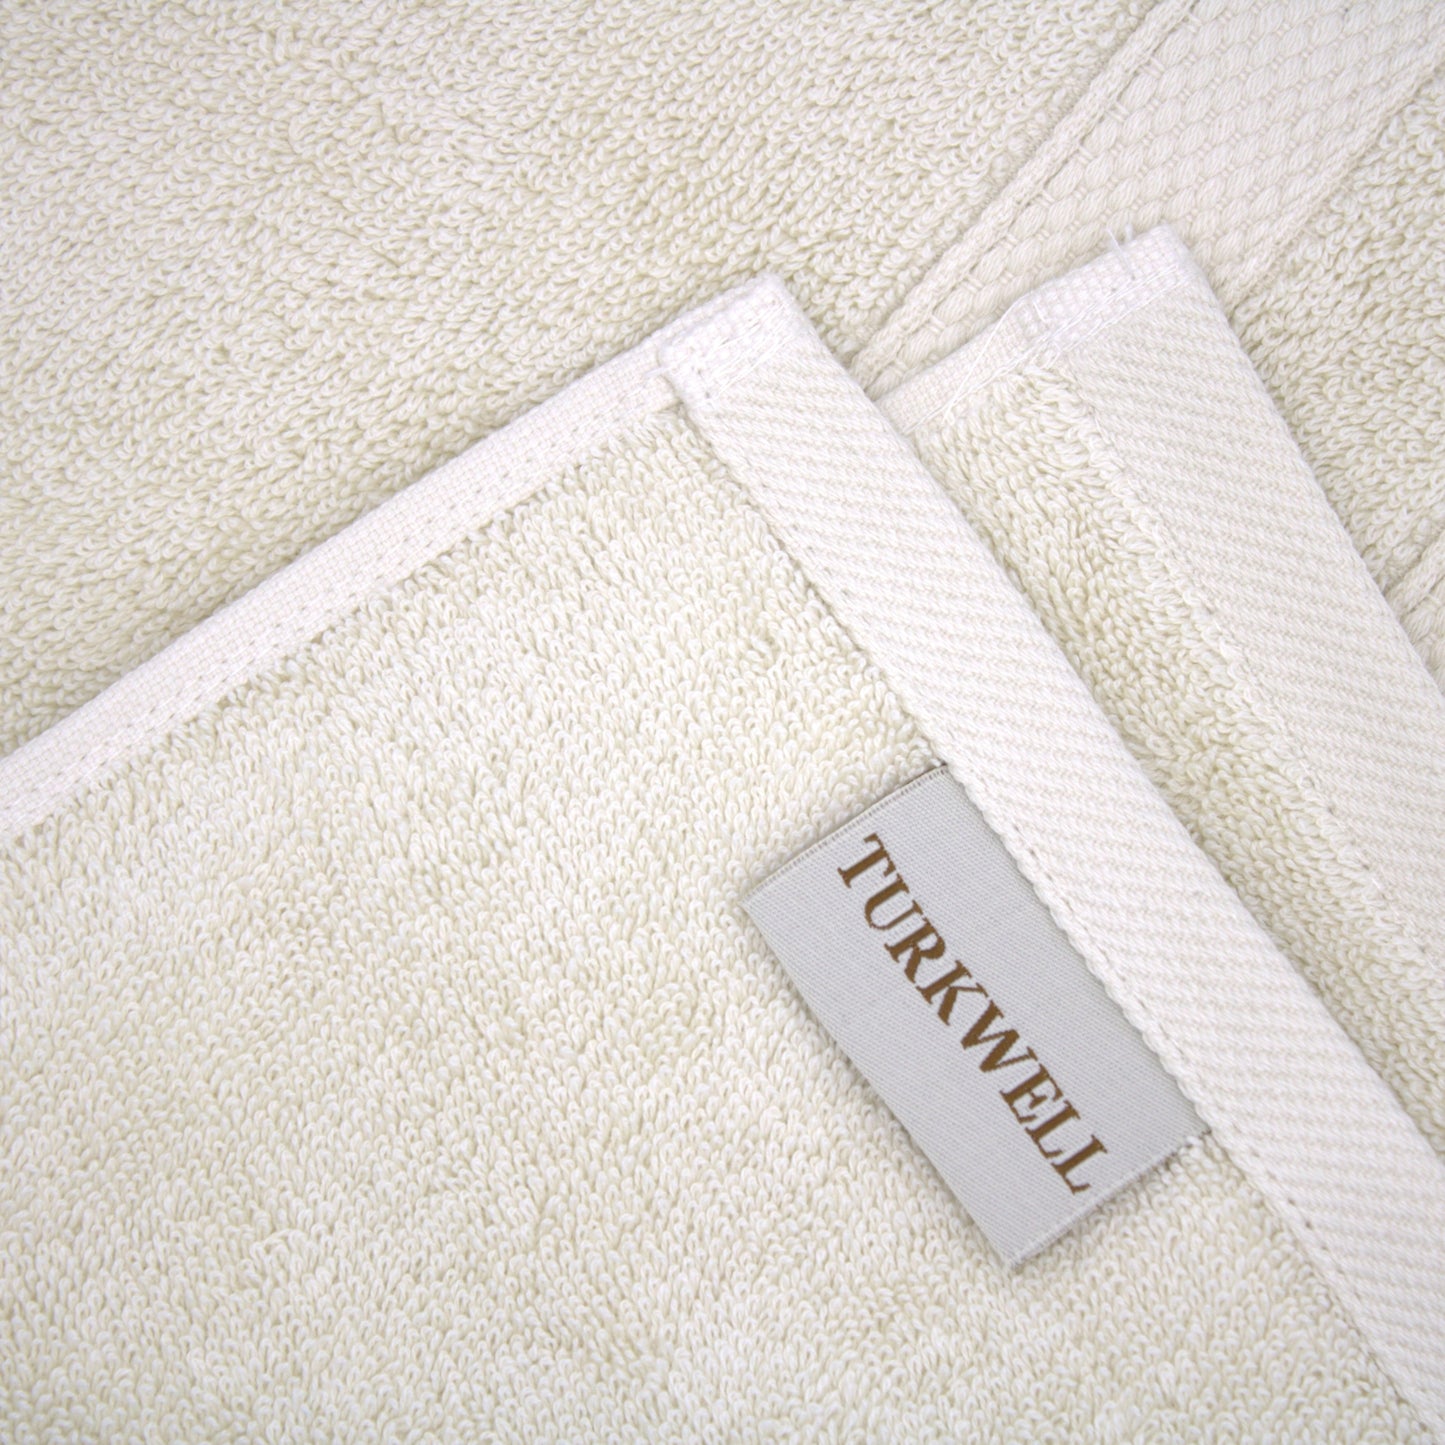 Turkwell Luxury Bath Towels Set, 100% Combed Cotton, 27x54 in, Beige Bath Towel Set of 3